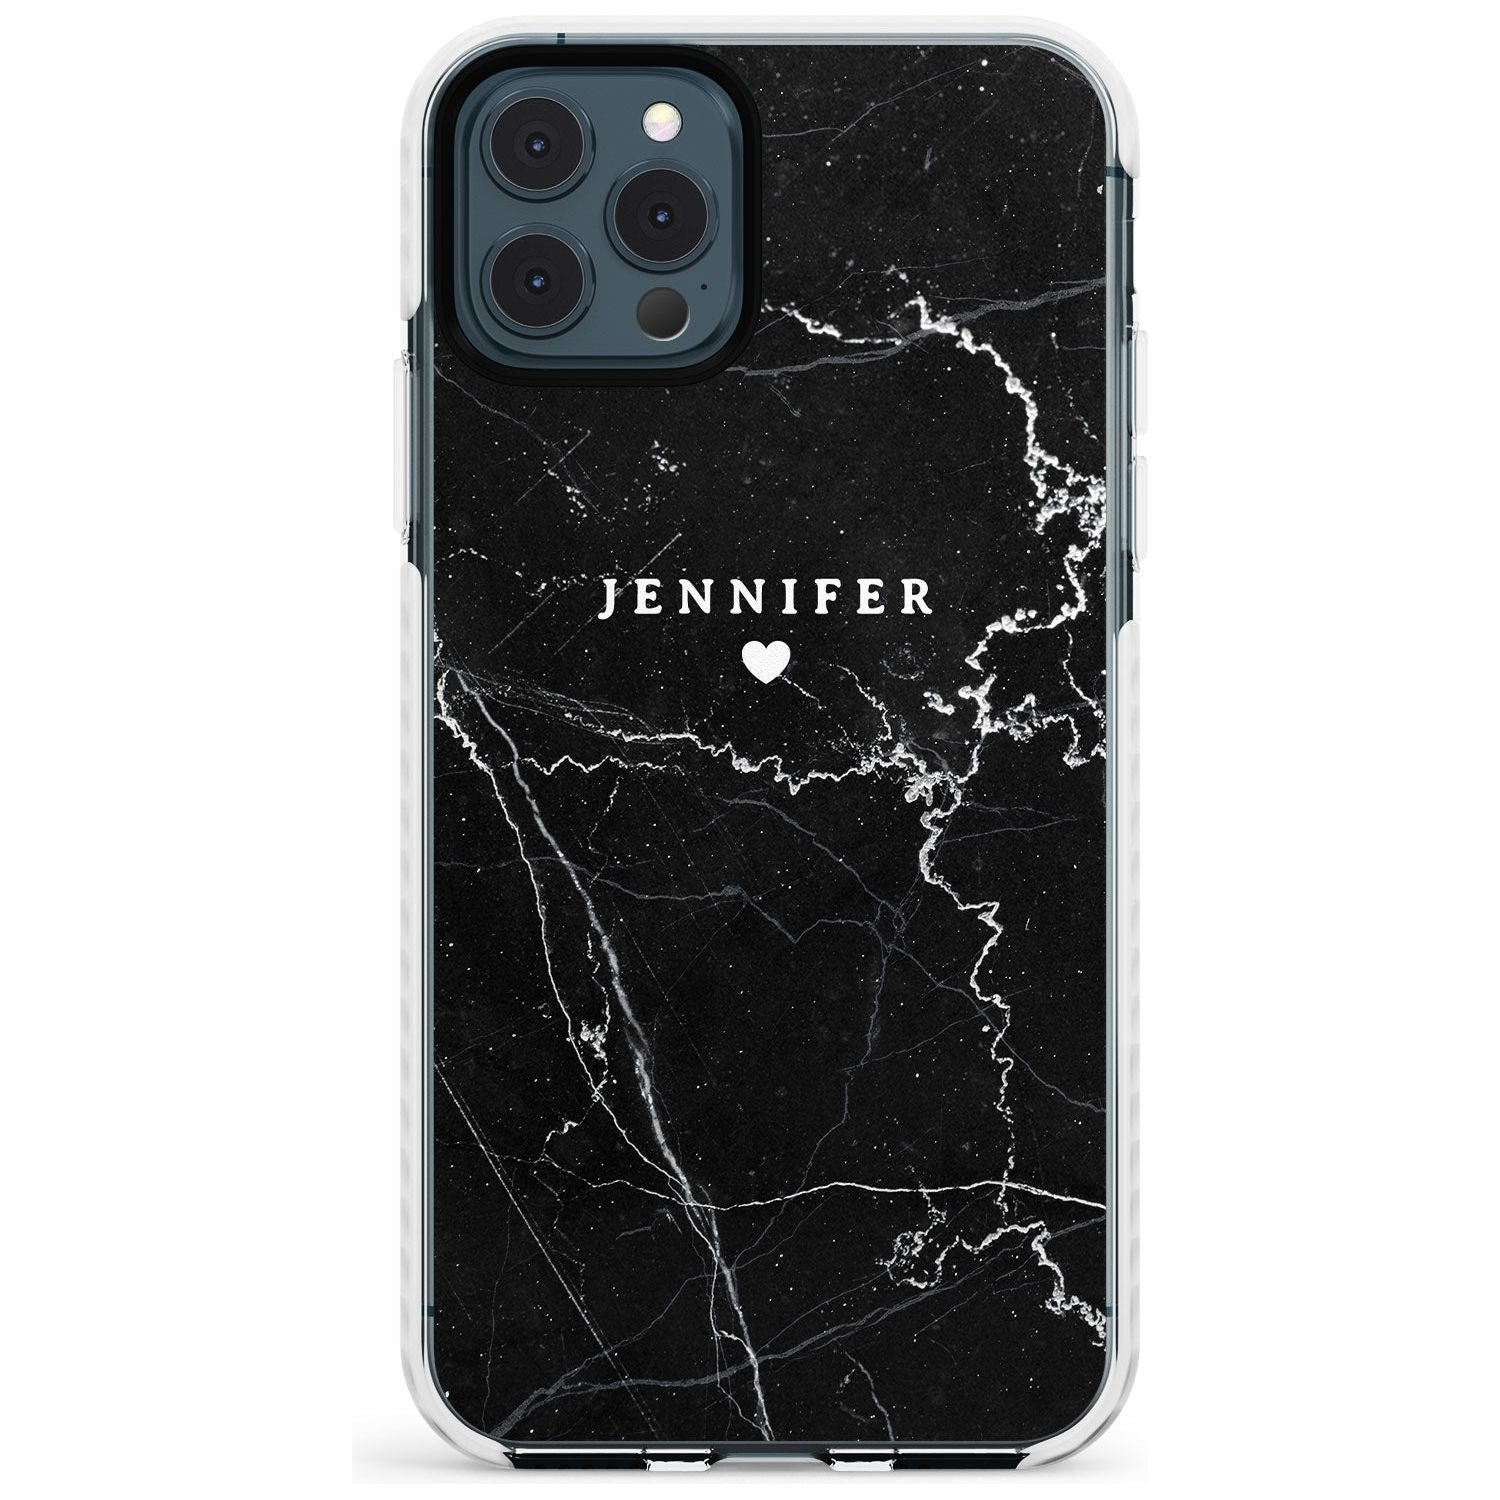 Personalised Black Marble Slim TPU Phone Case for iPhone 11 Pro Max